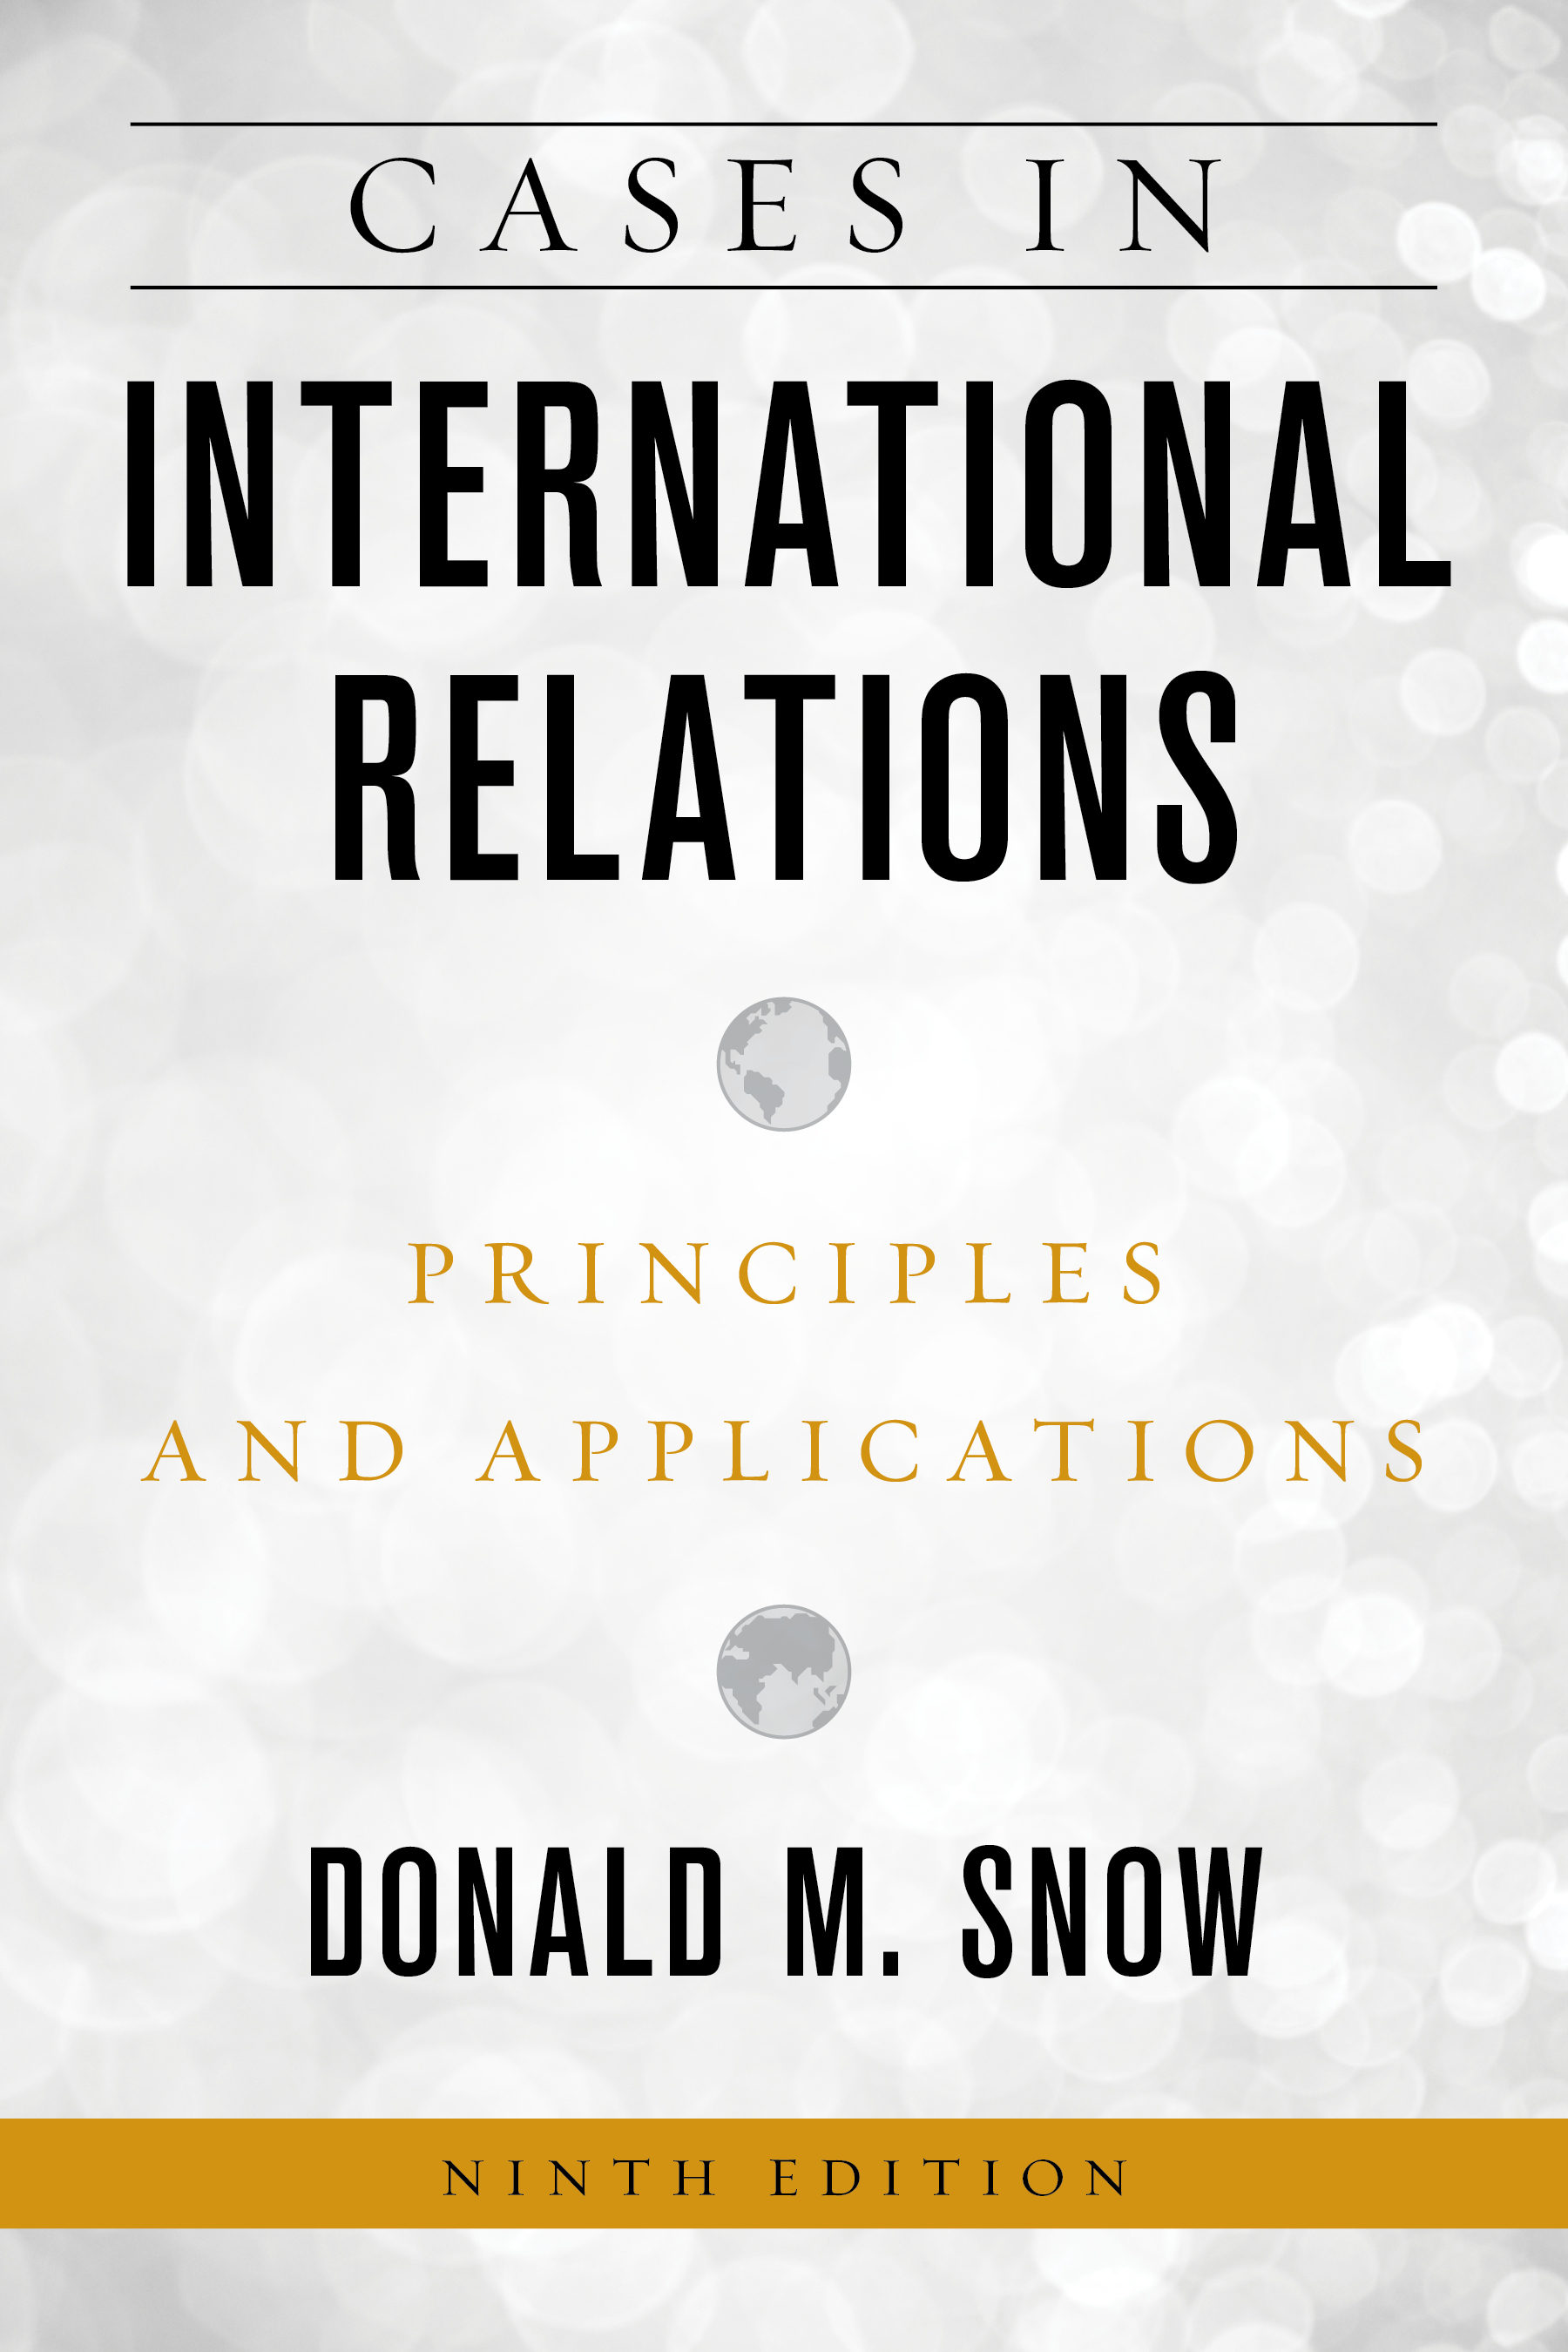 Cases in International Relations, 9th Edition: Principles and Applications